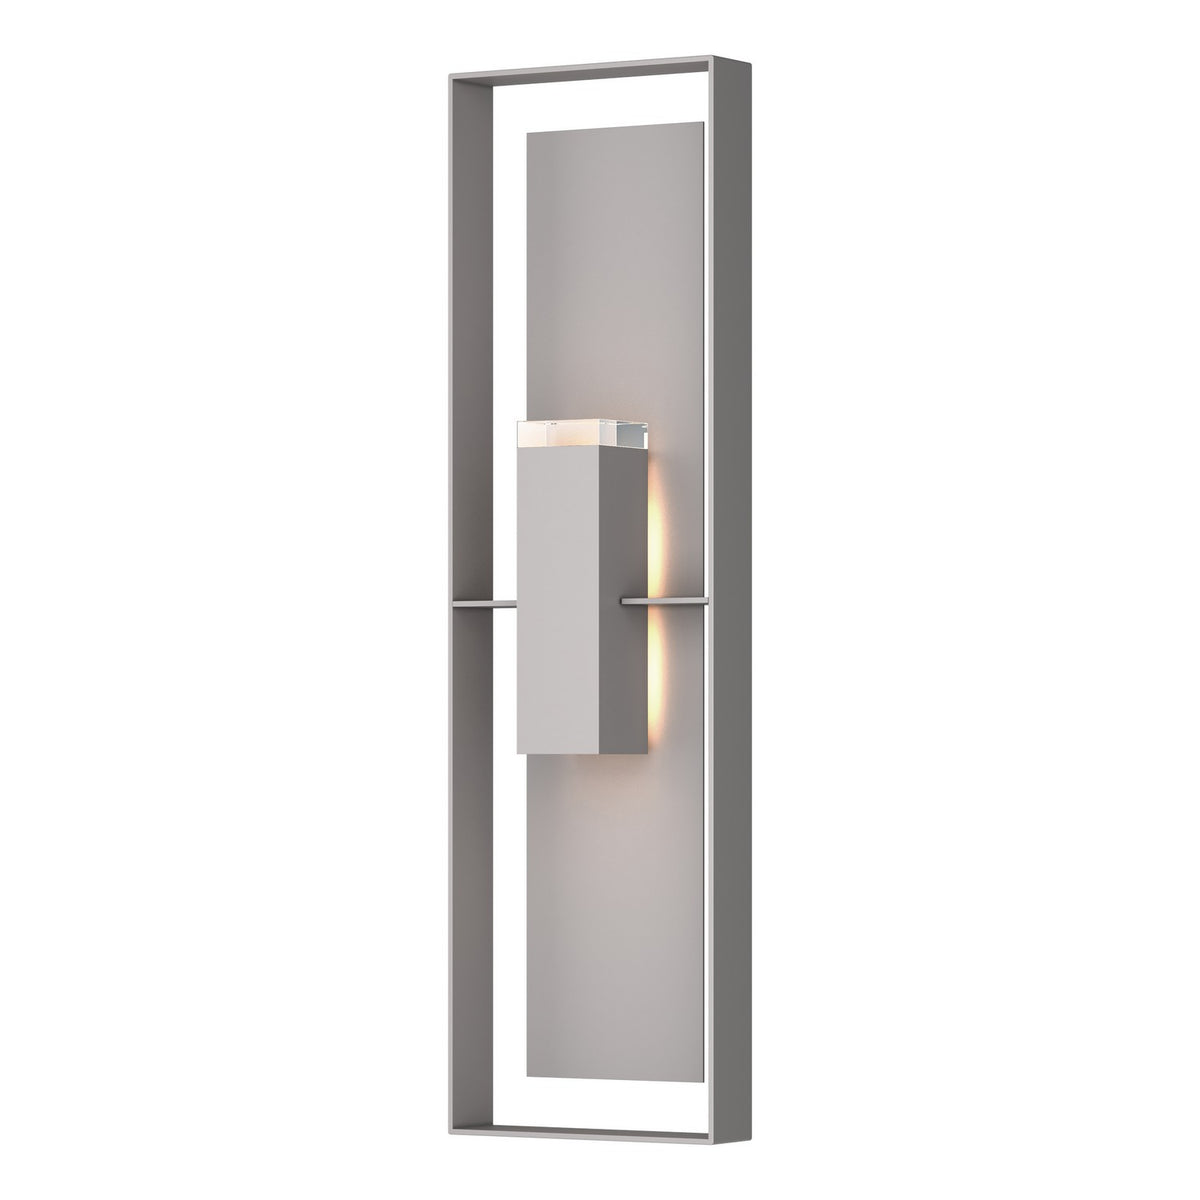 Hubbardton Forge - 302608-SKT-78-78-ZM0736 - Two Light Outdoor Wall Sconce - Shadow Box - Coastal Burnished Steel